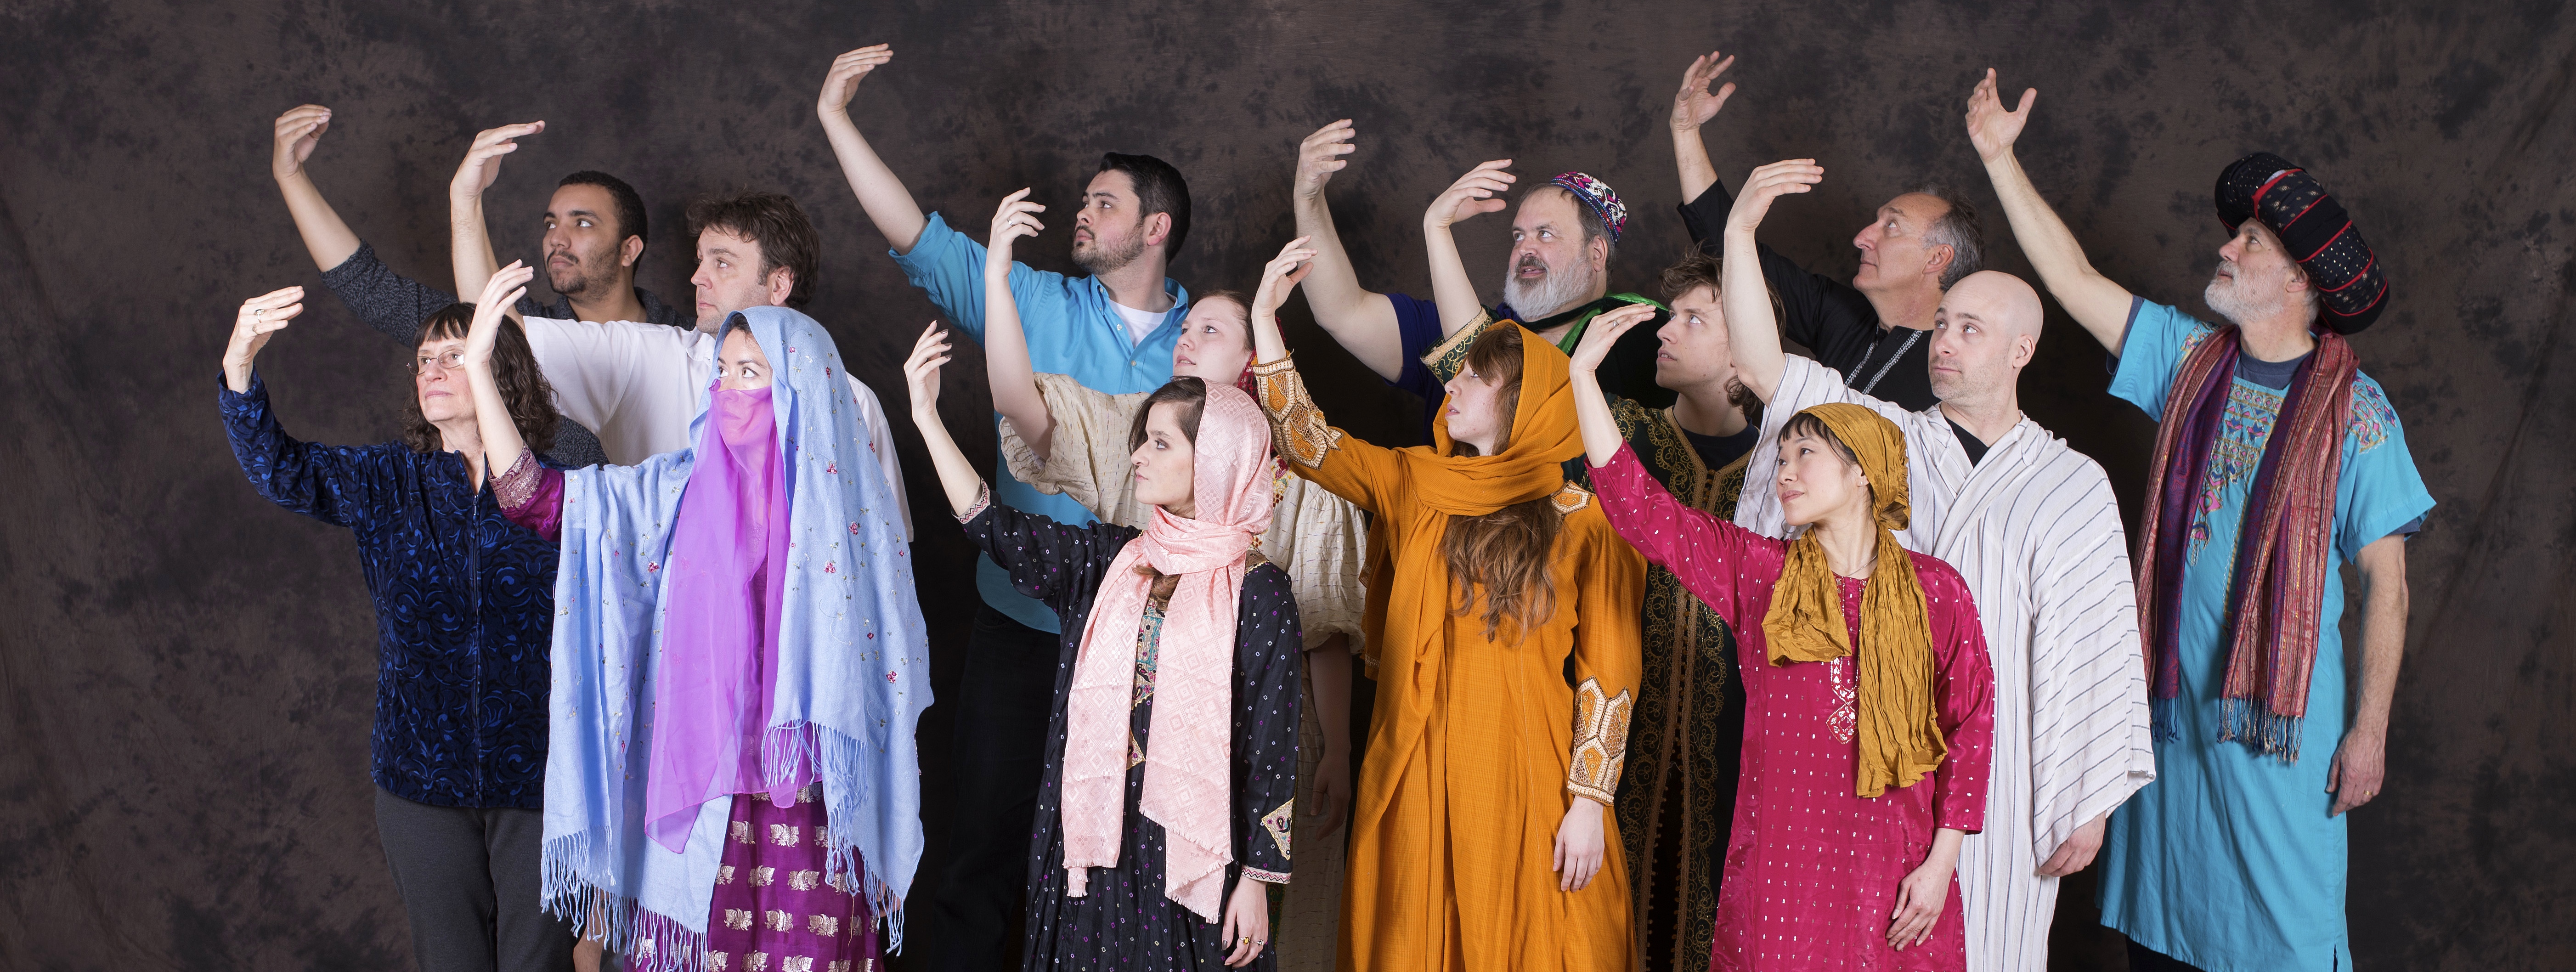 “The Arabian Nights” at GreenMan Theatre Meaningful to the Cast